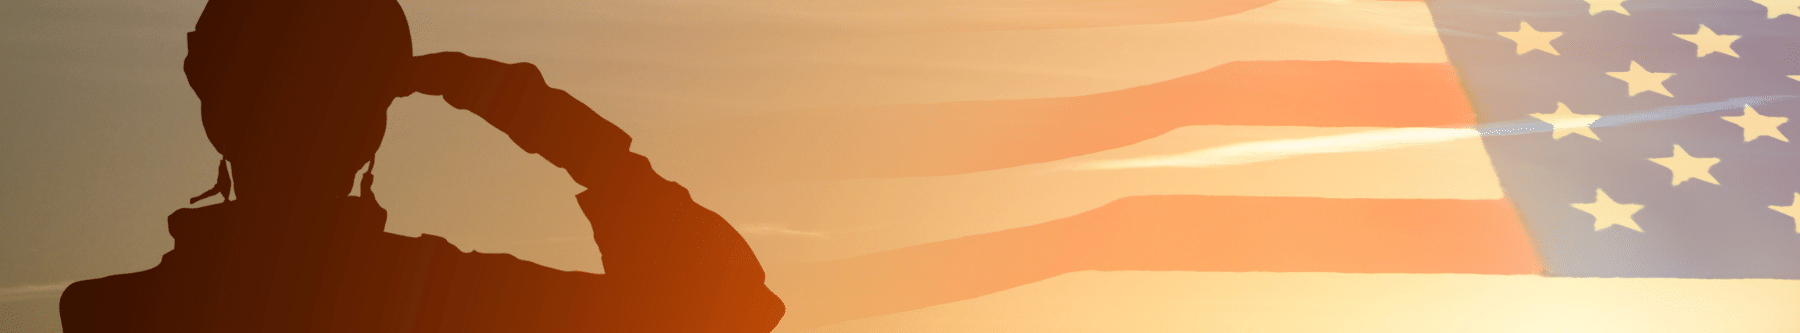 A image of a military man saluting the flag in a orange sky.heroes